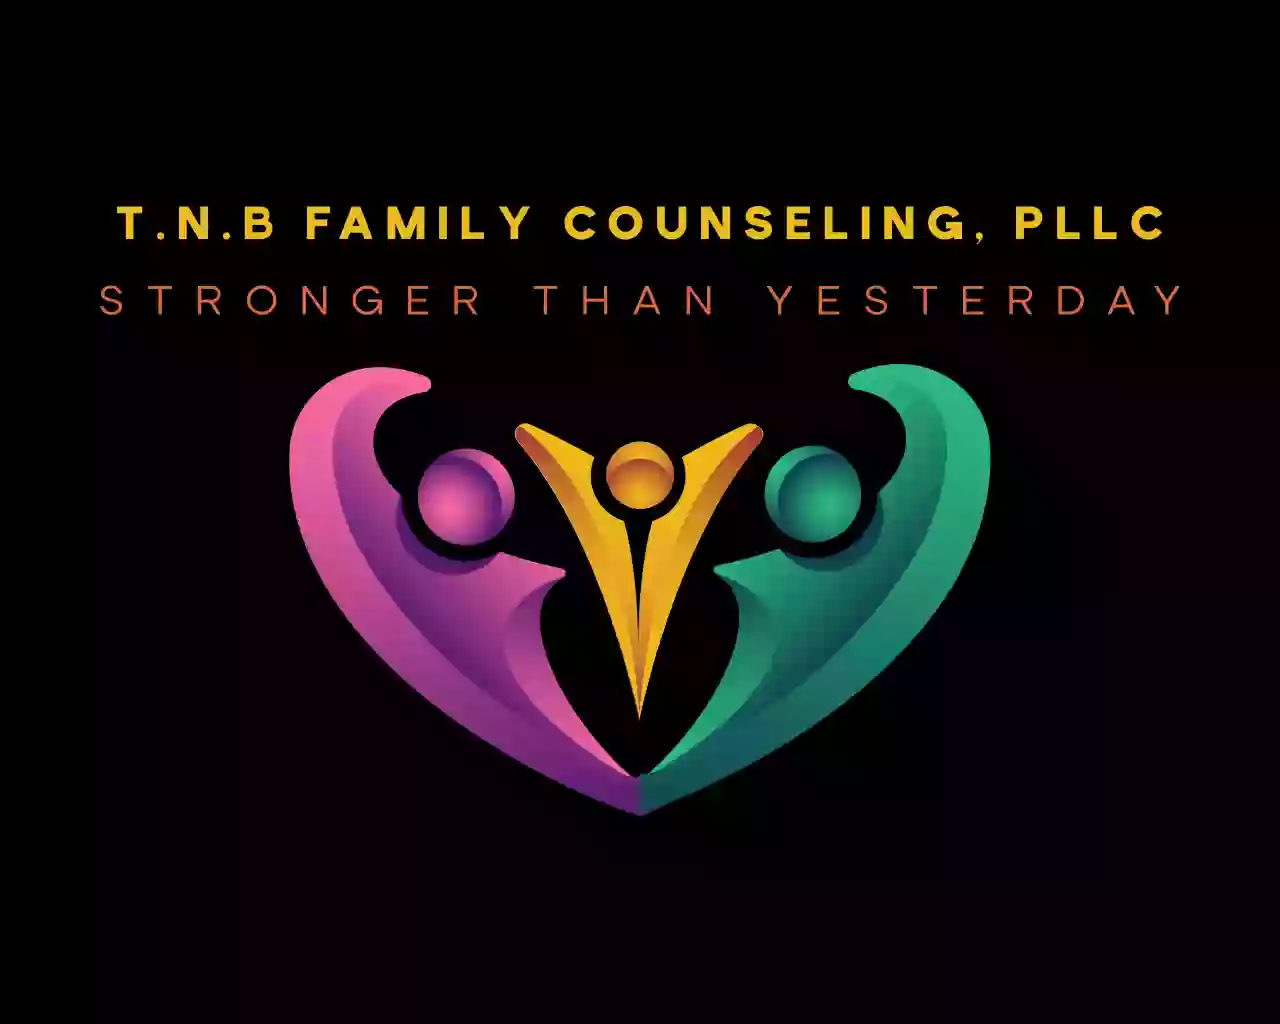 T.N.B Family Counseling, PLLC